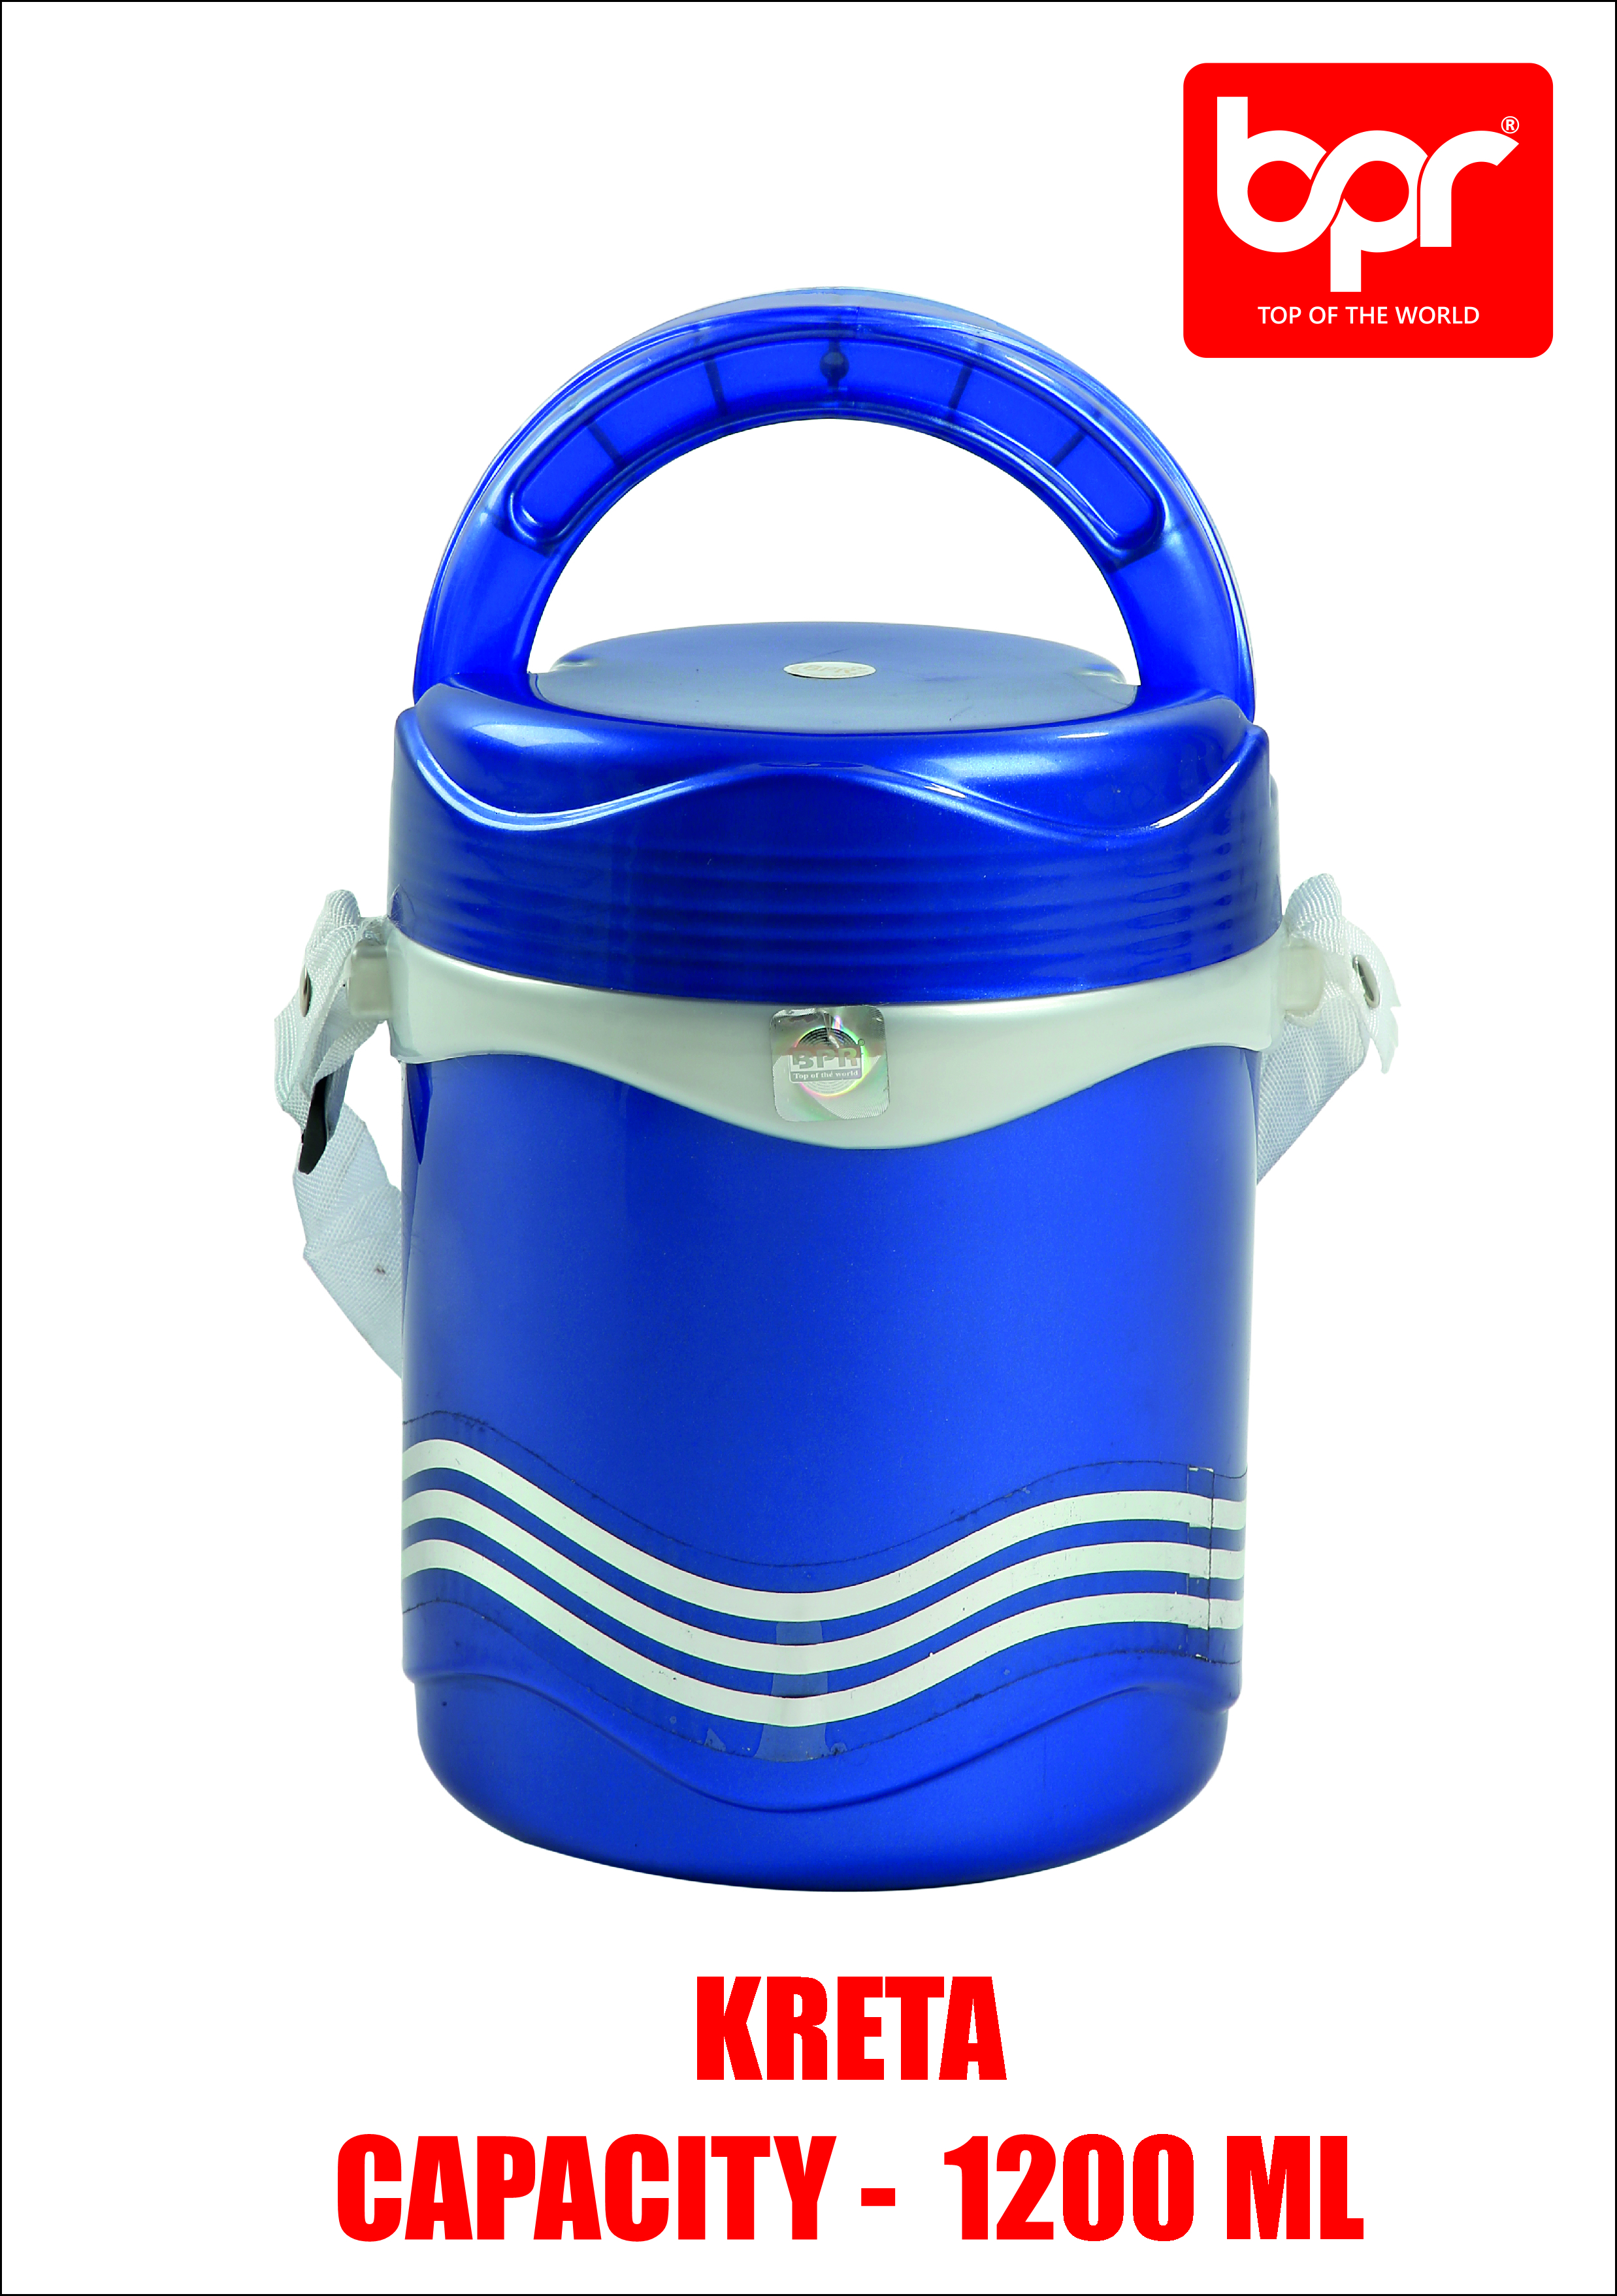 Thermoware Lunch Box